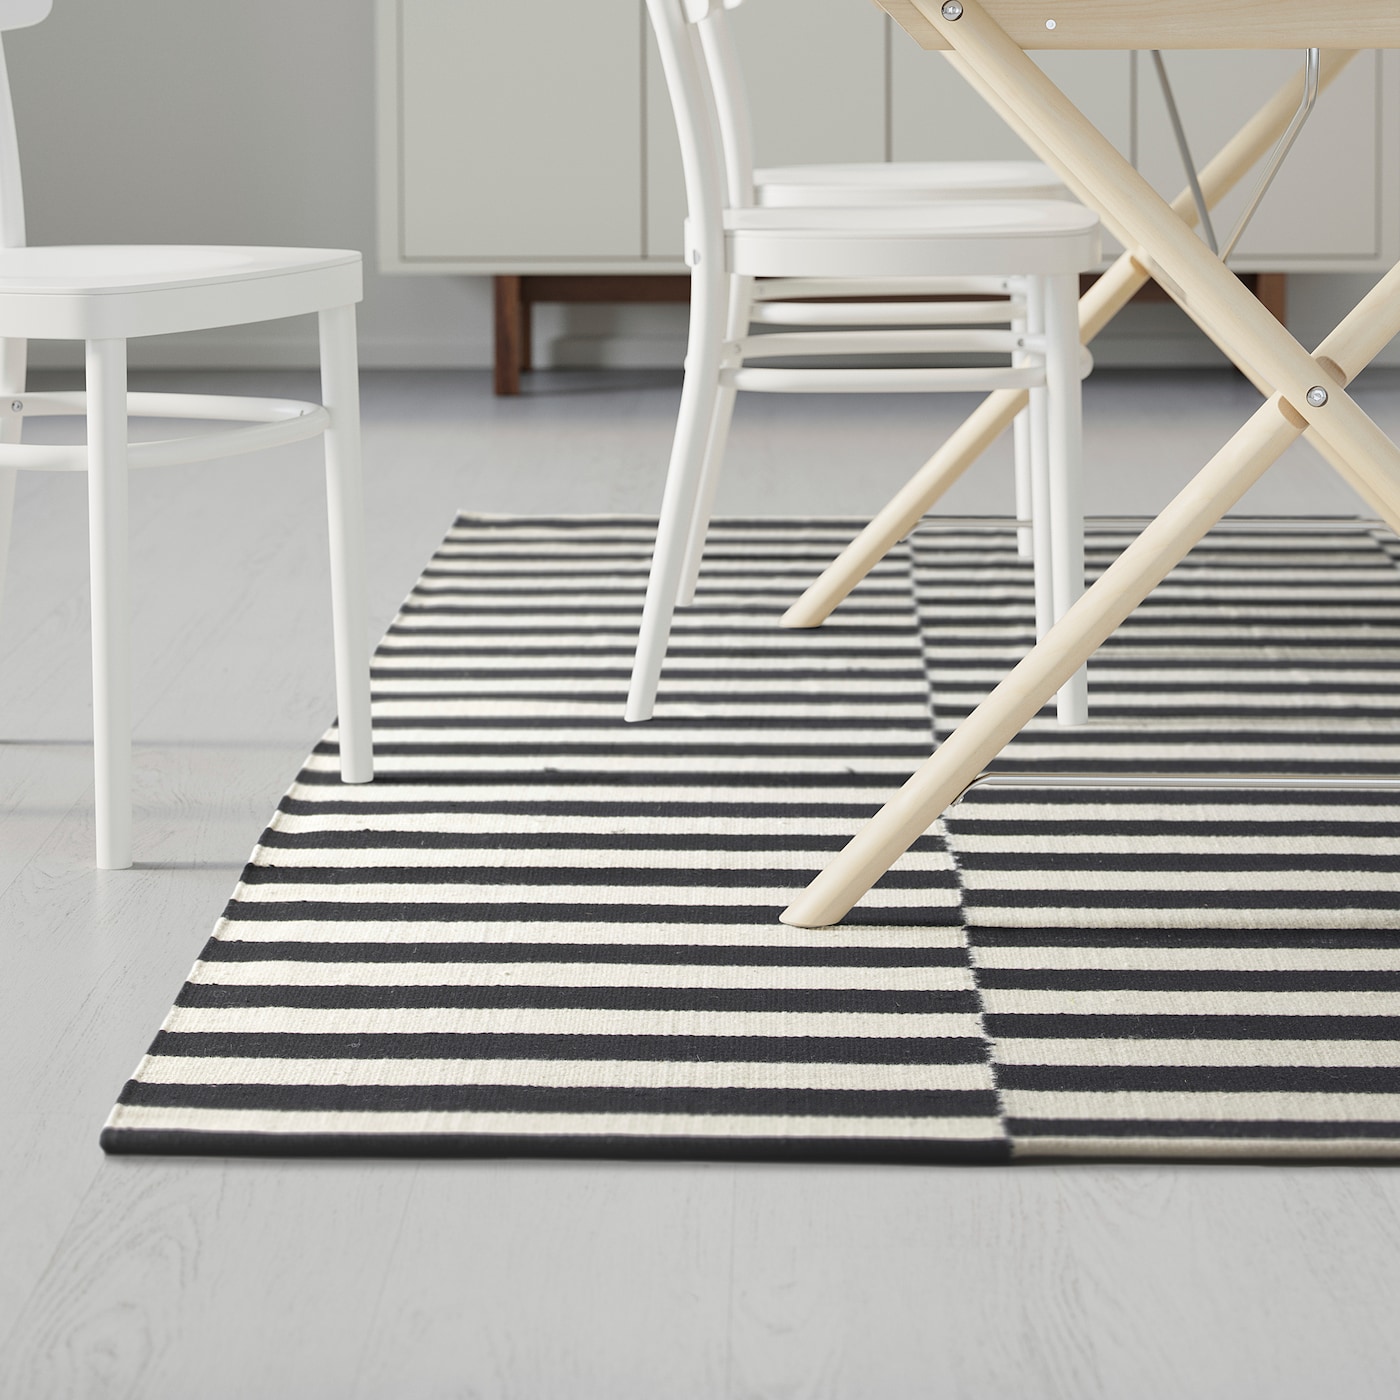 Stockholm-rug-from-IKEA-32117